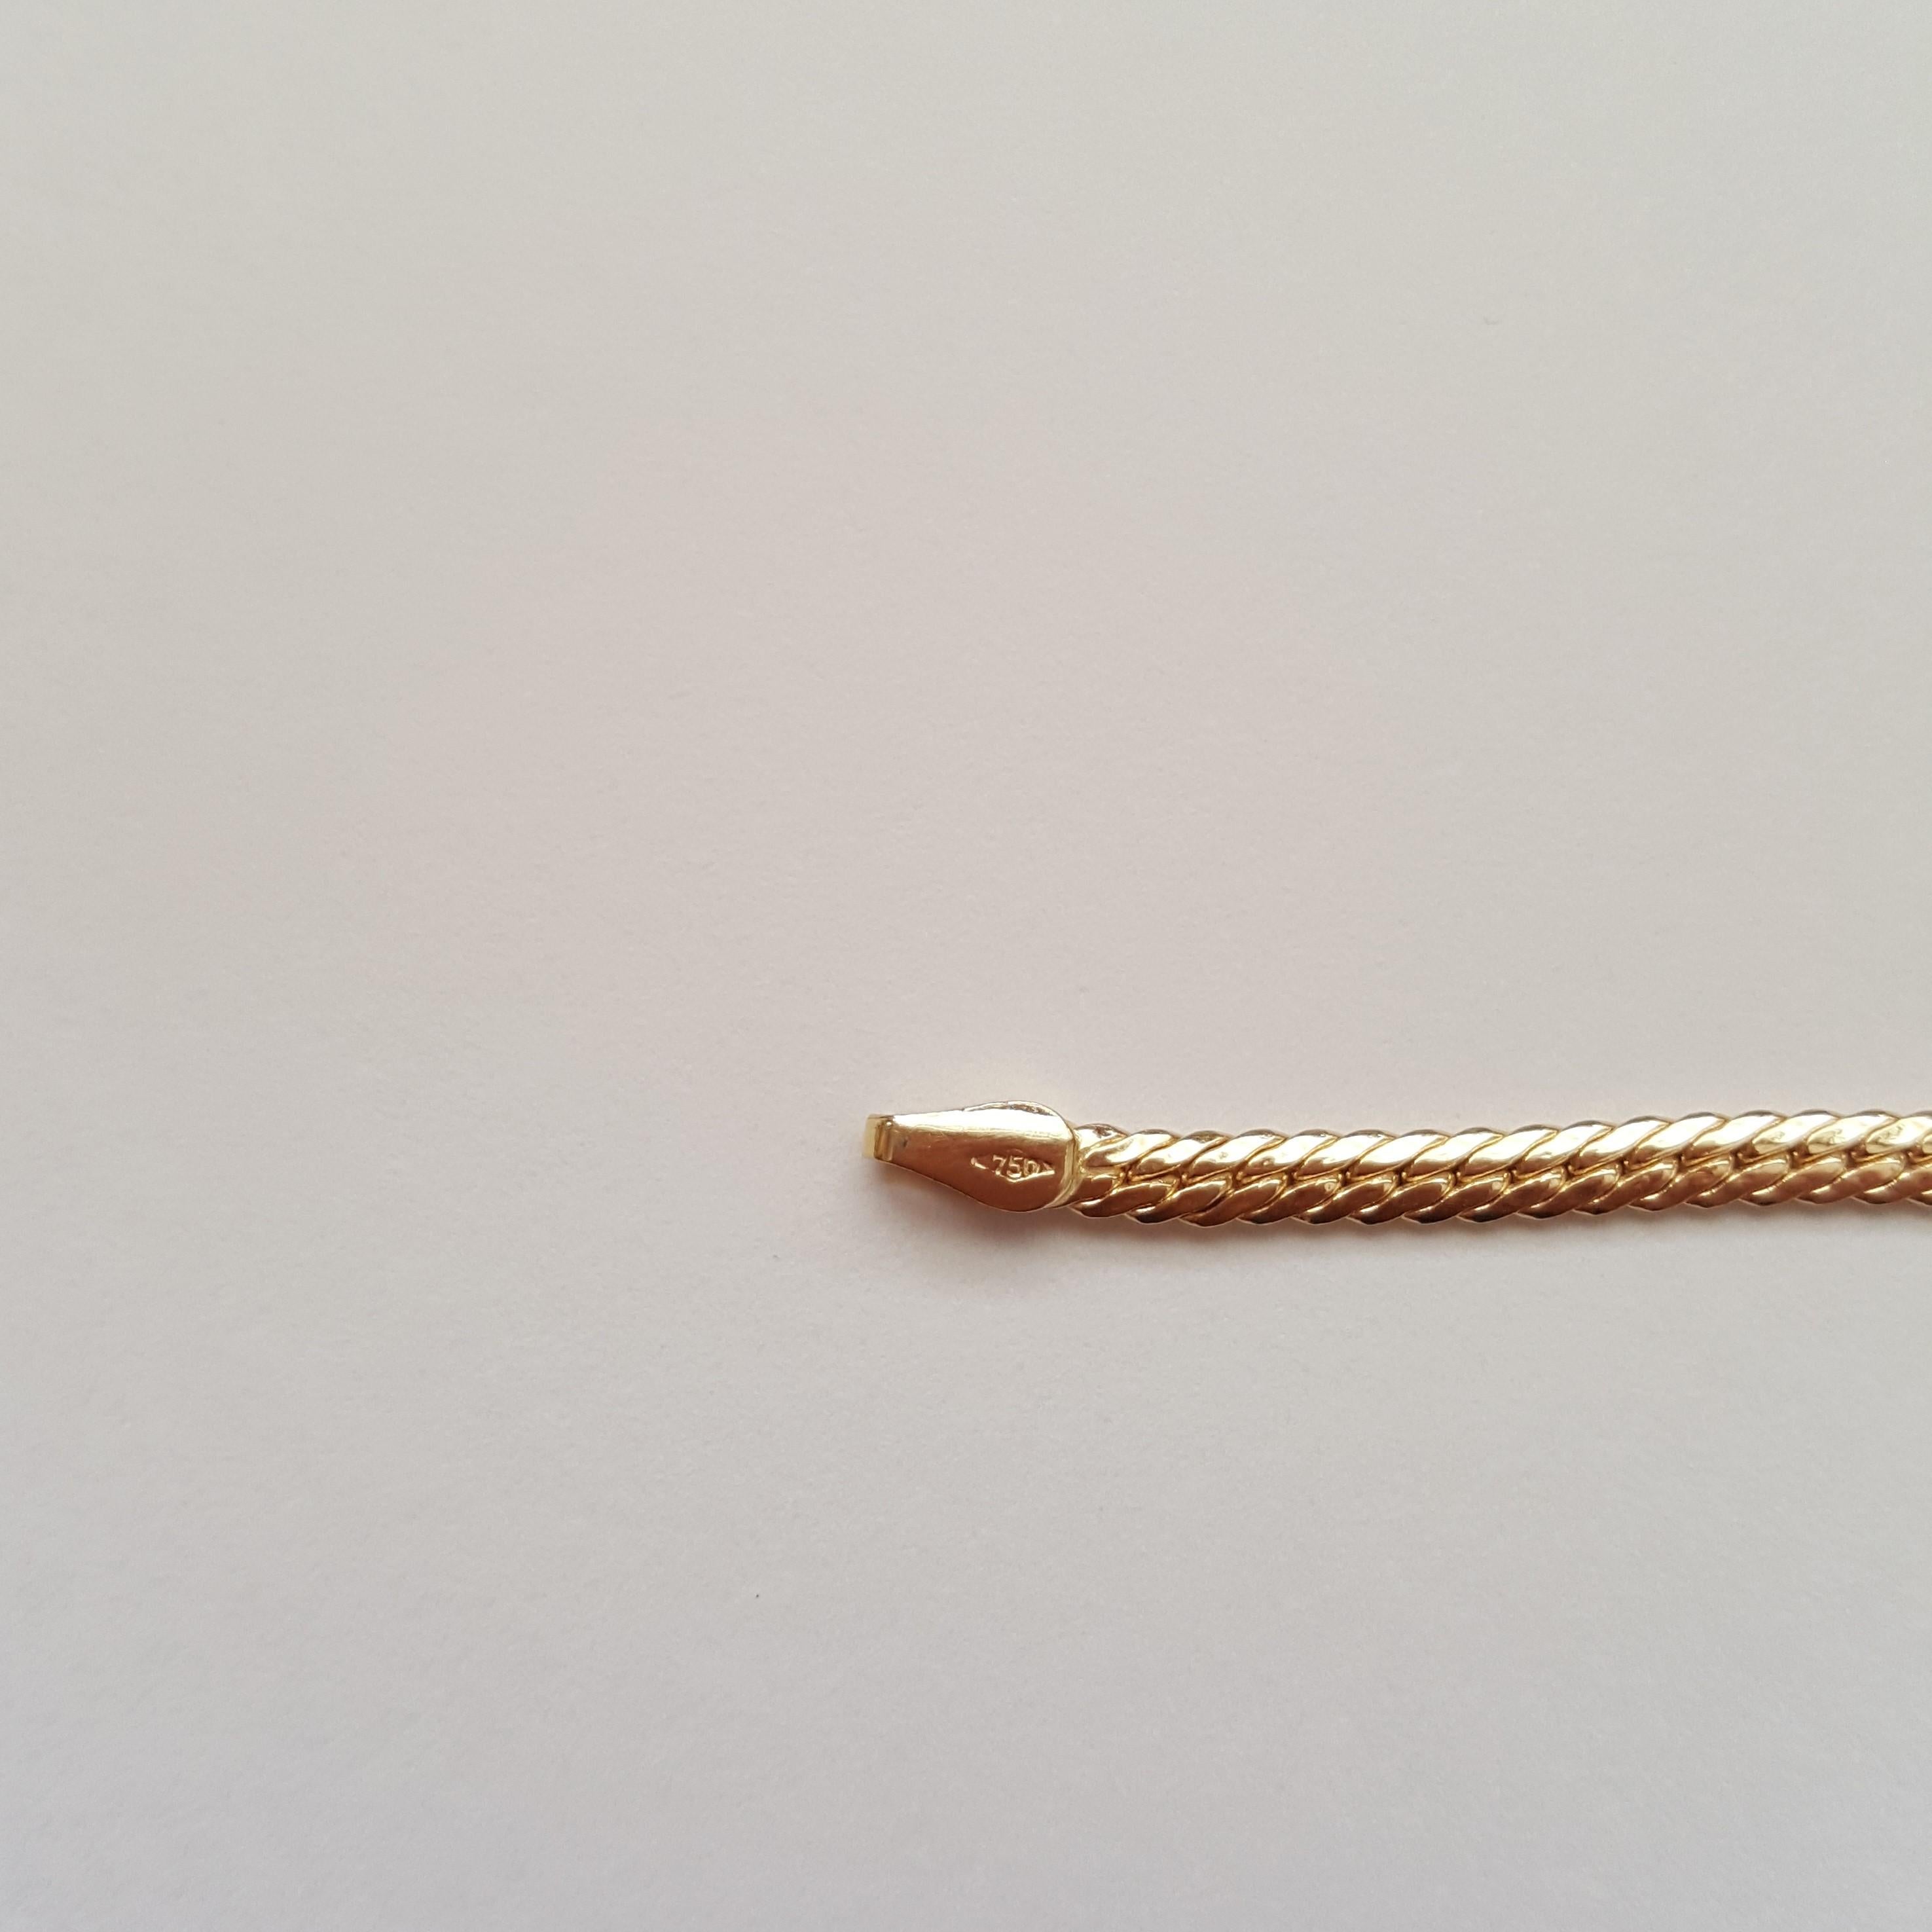 18kt Yellow Gold Curb Link Bracelet, Lobster Clasp, 2.8 Grams 2